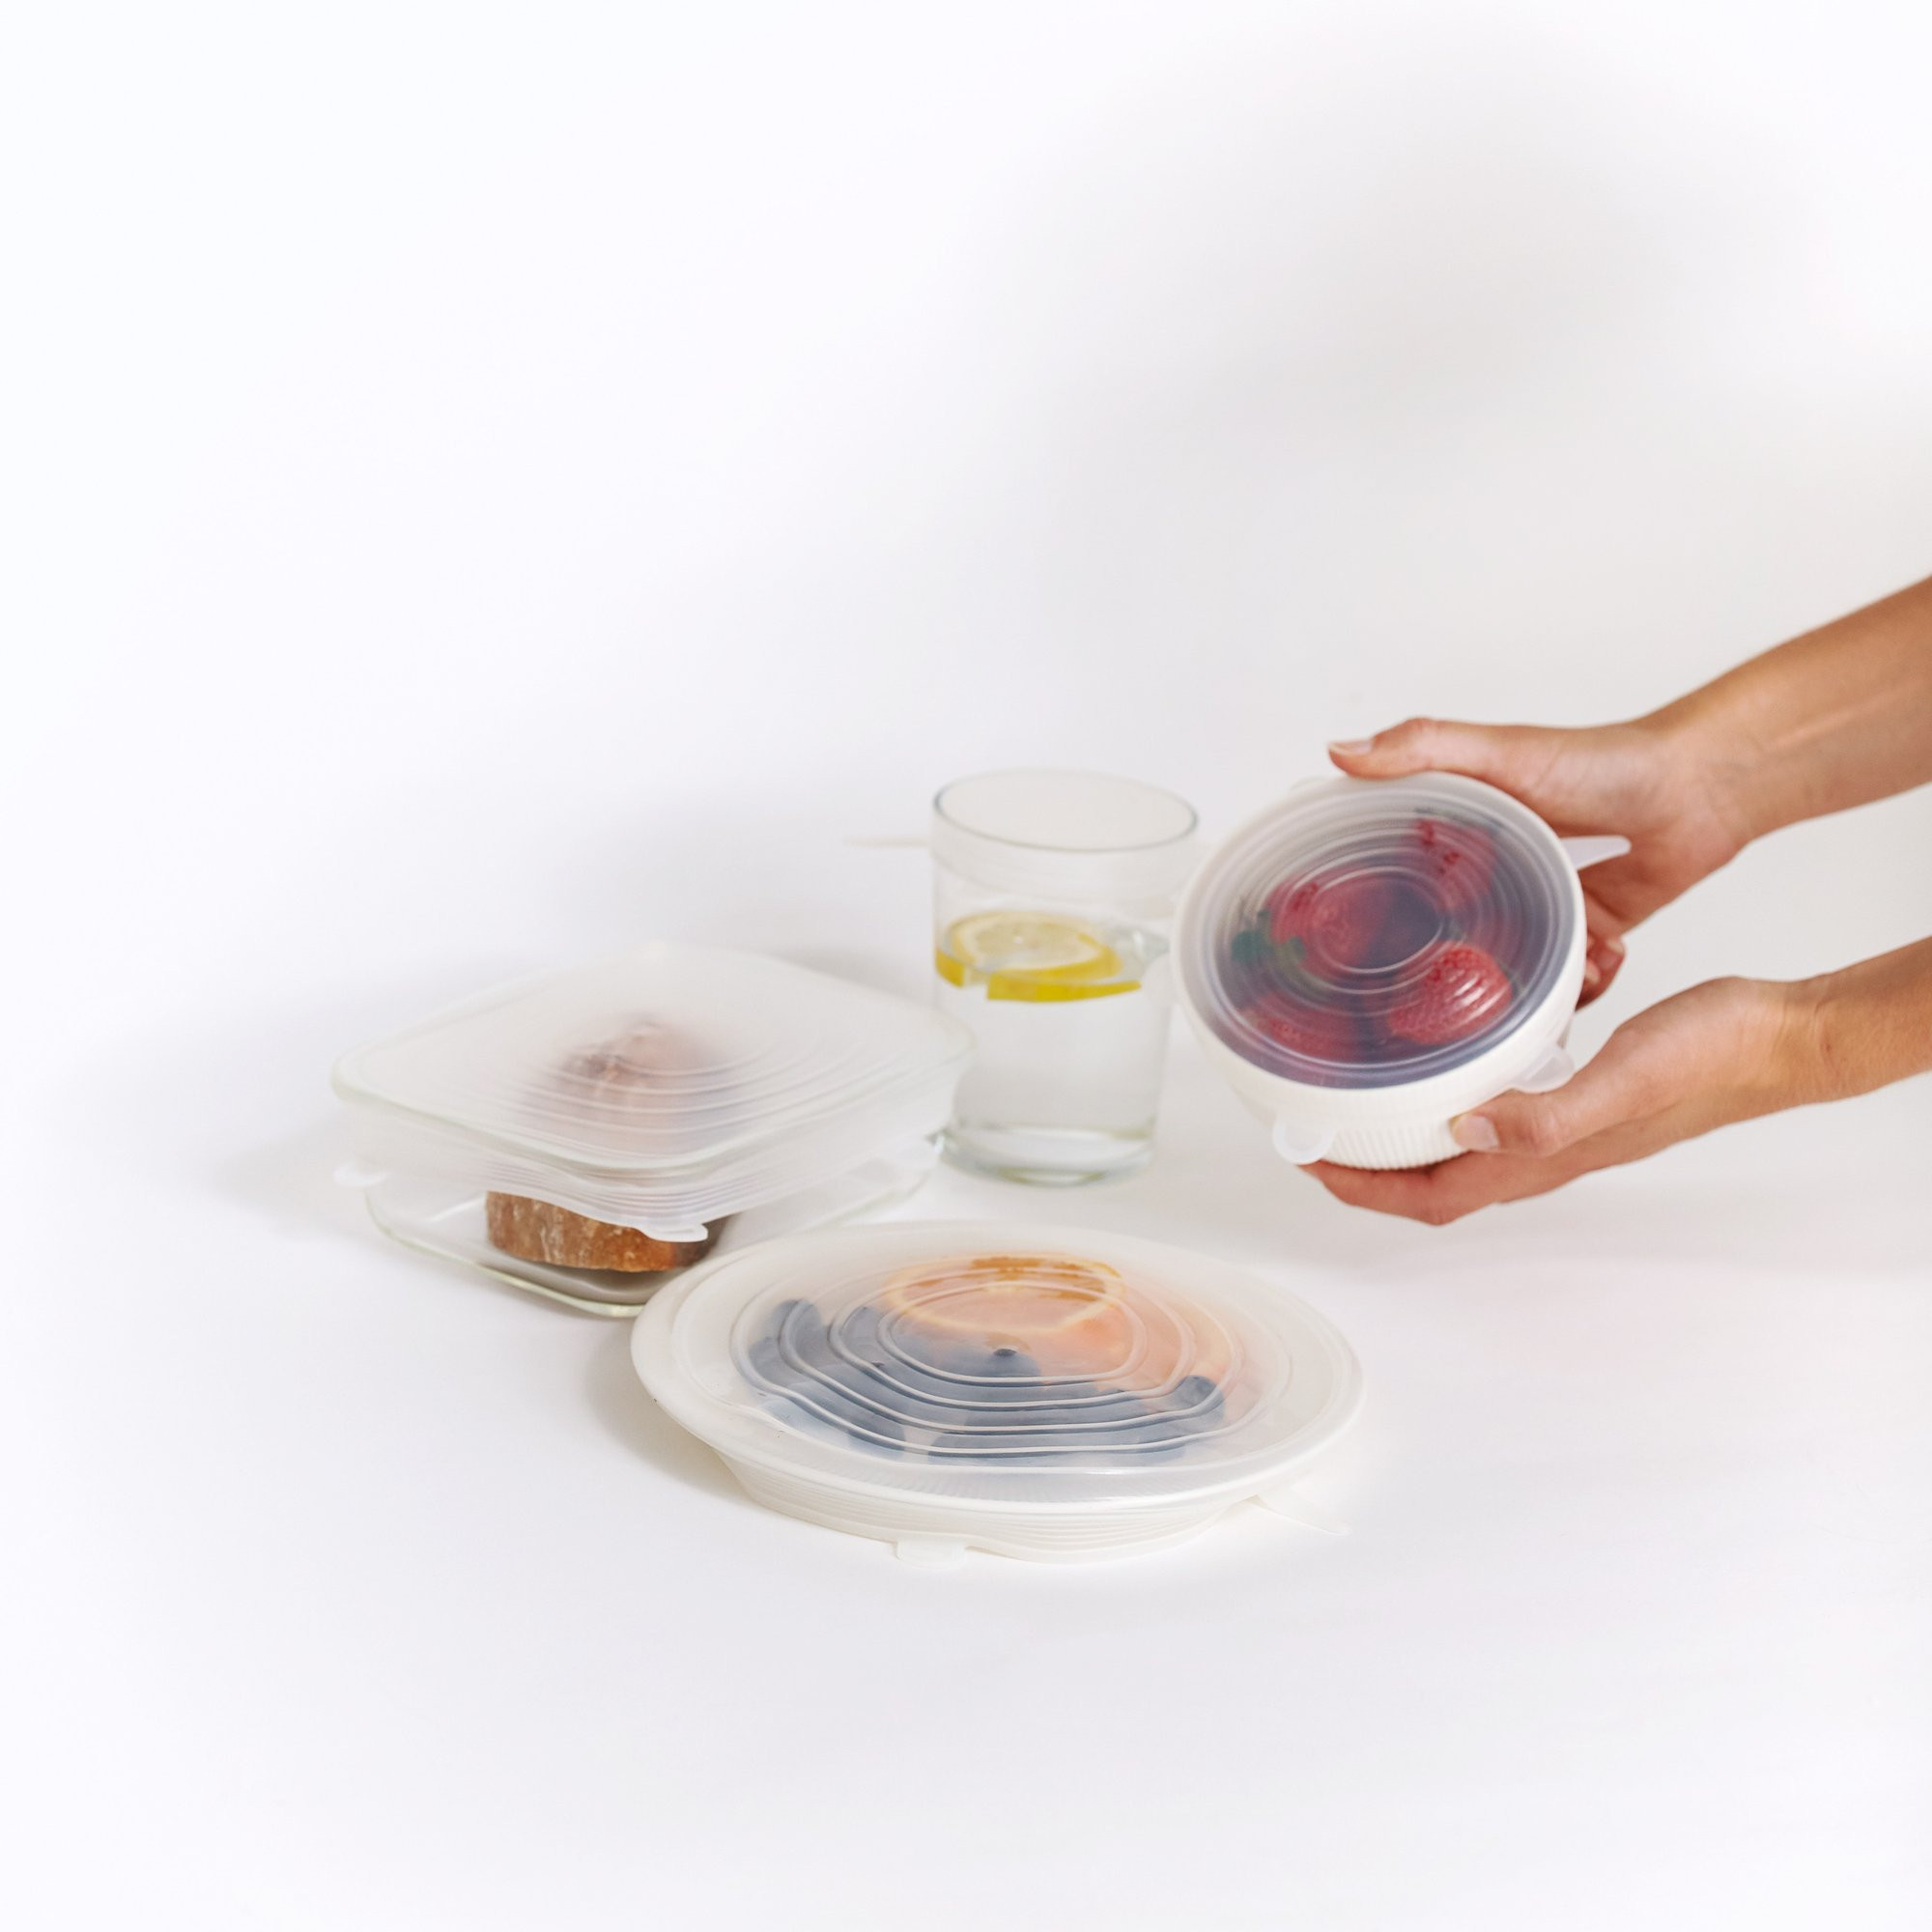 Go for Zero - Reusable Silicone Food Covers